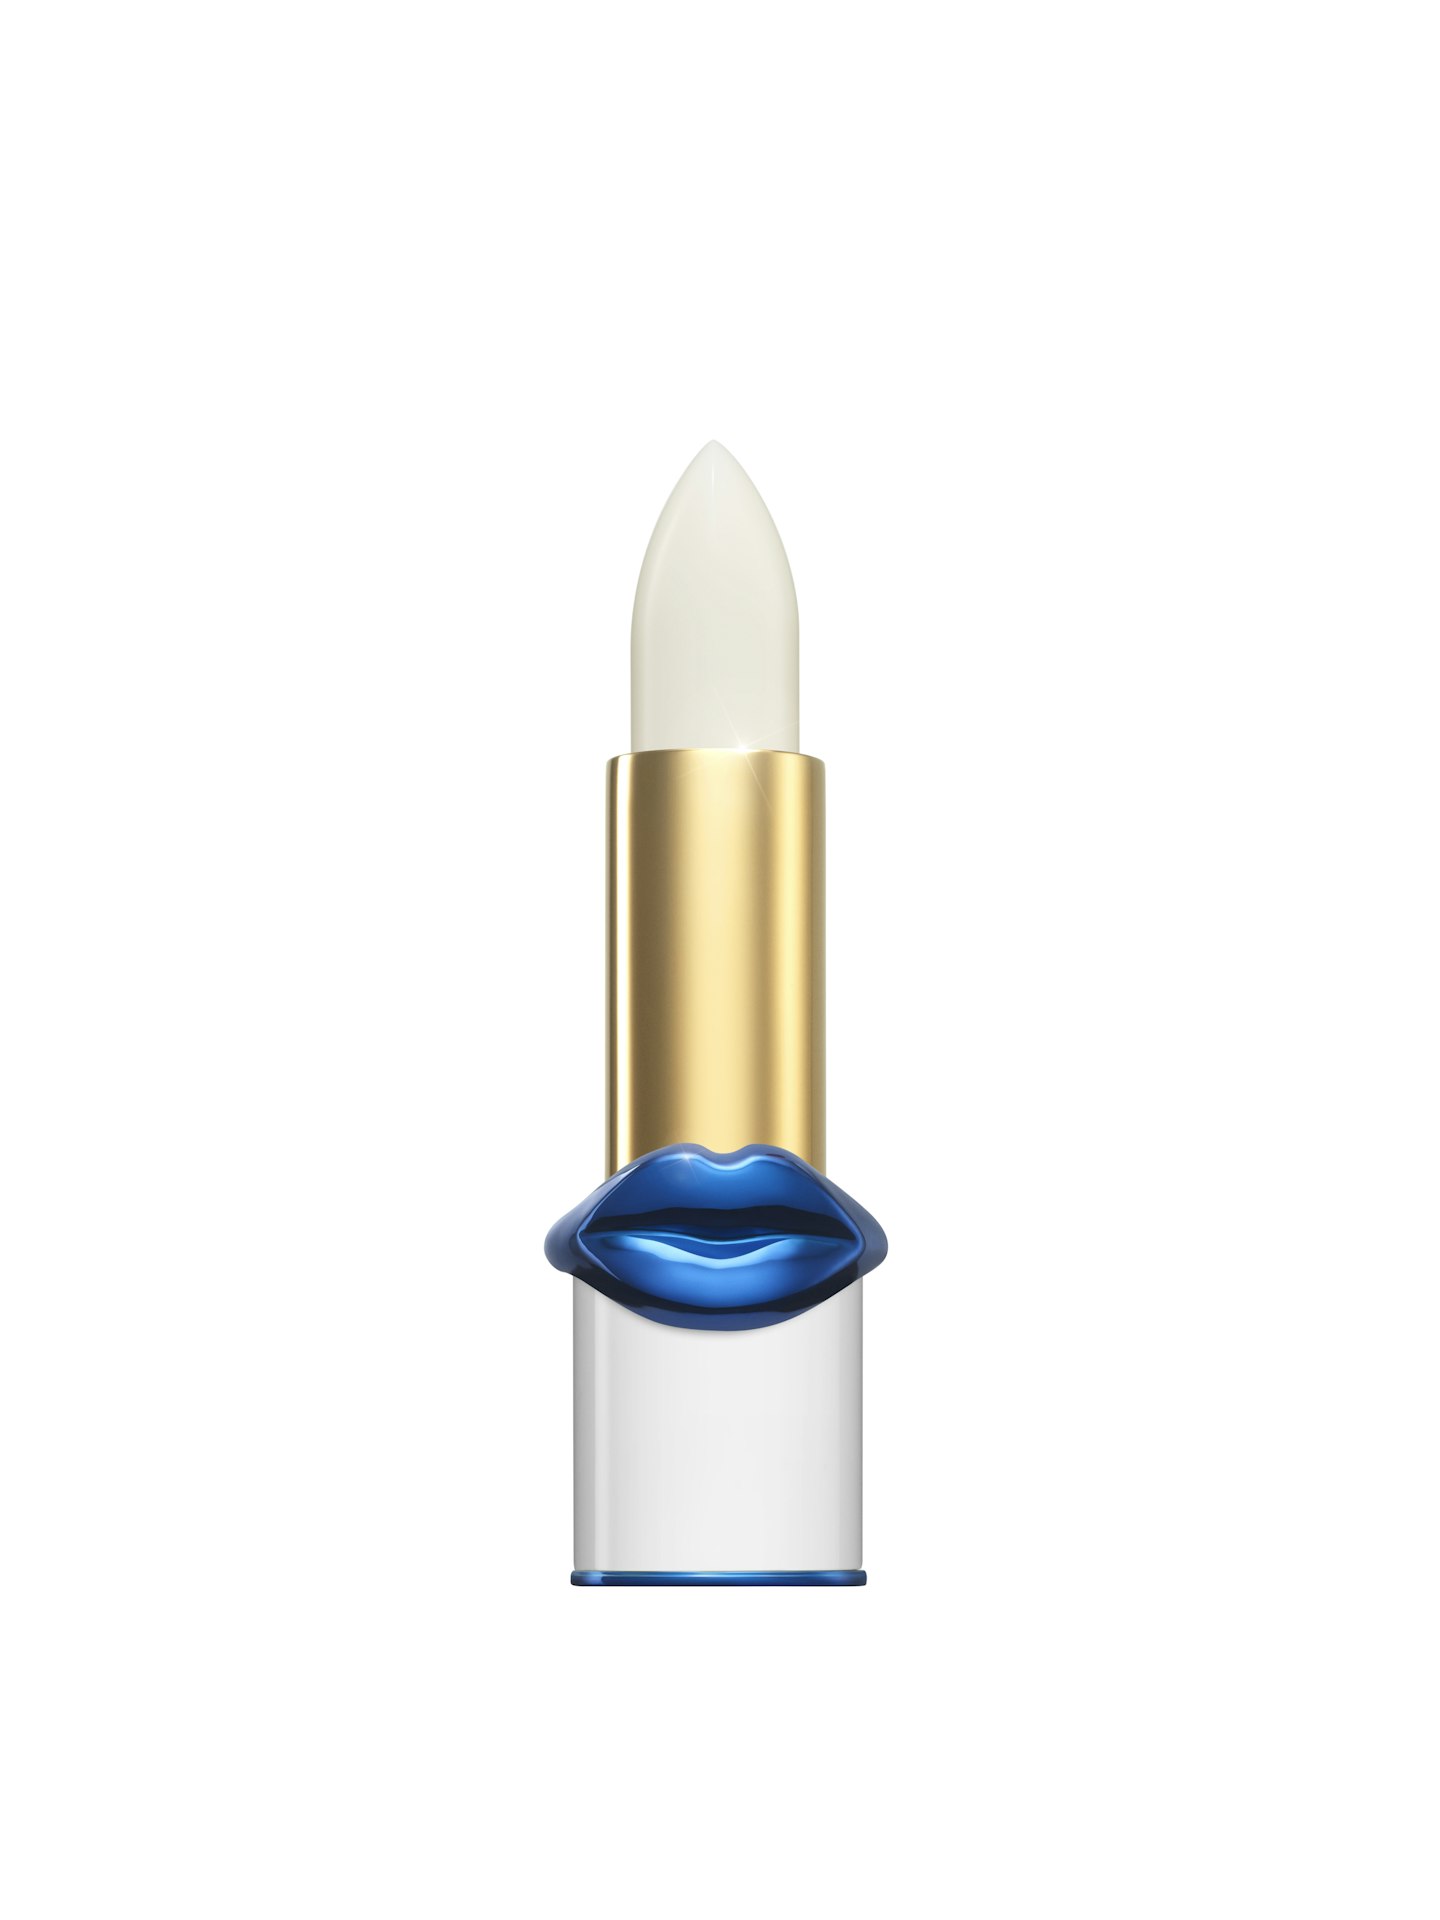 There's a Pat McGrath Star Wars lip balm about to land [upated] -  DisneyRollerGirl